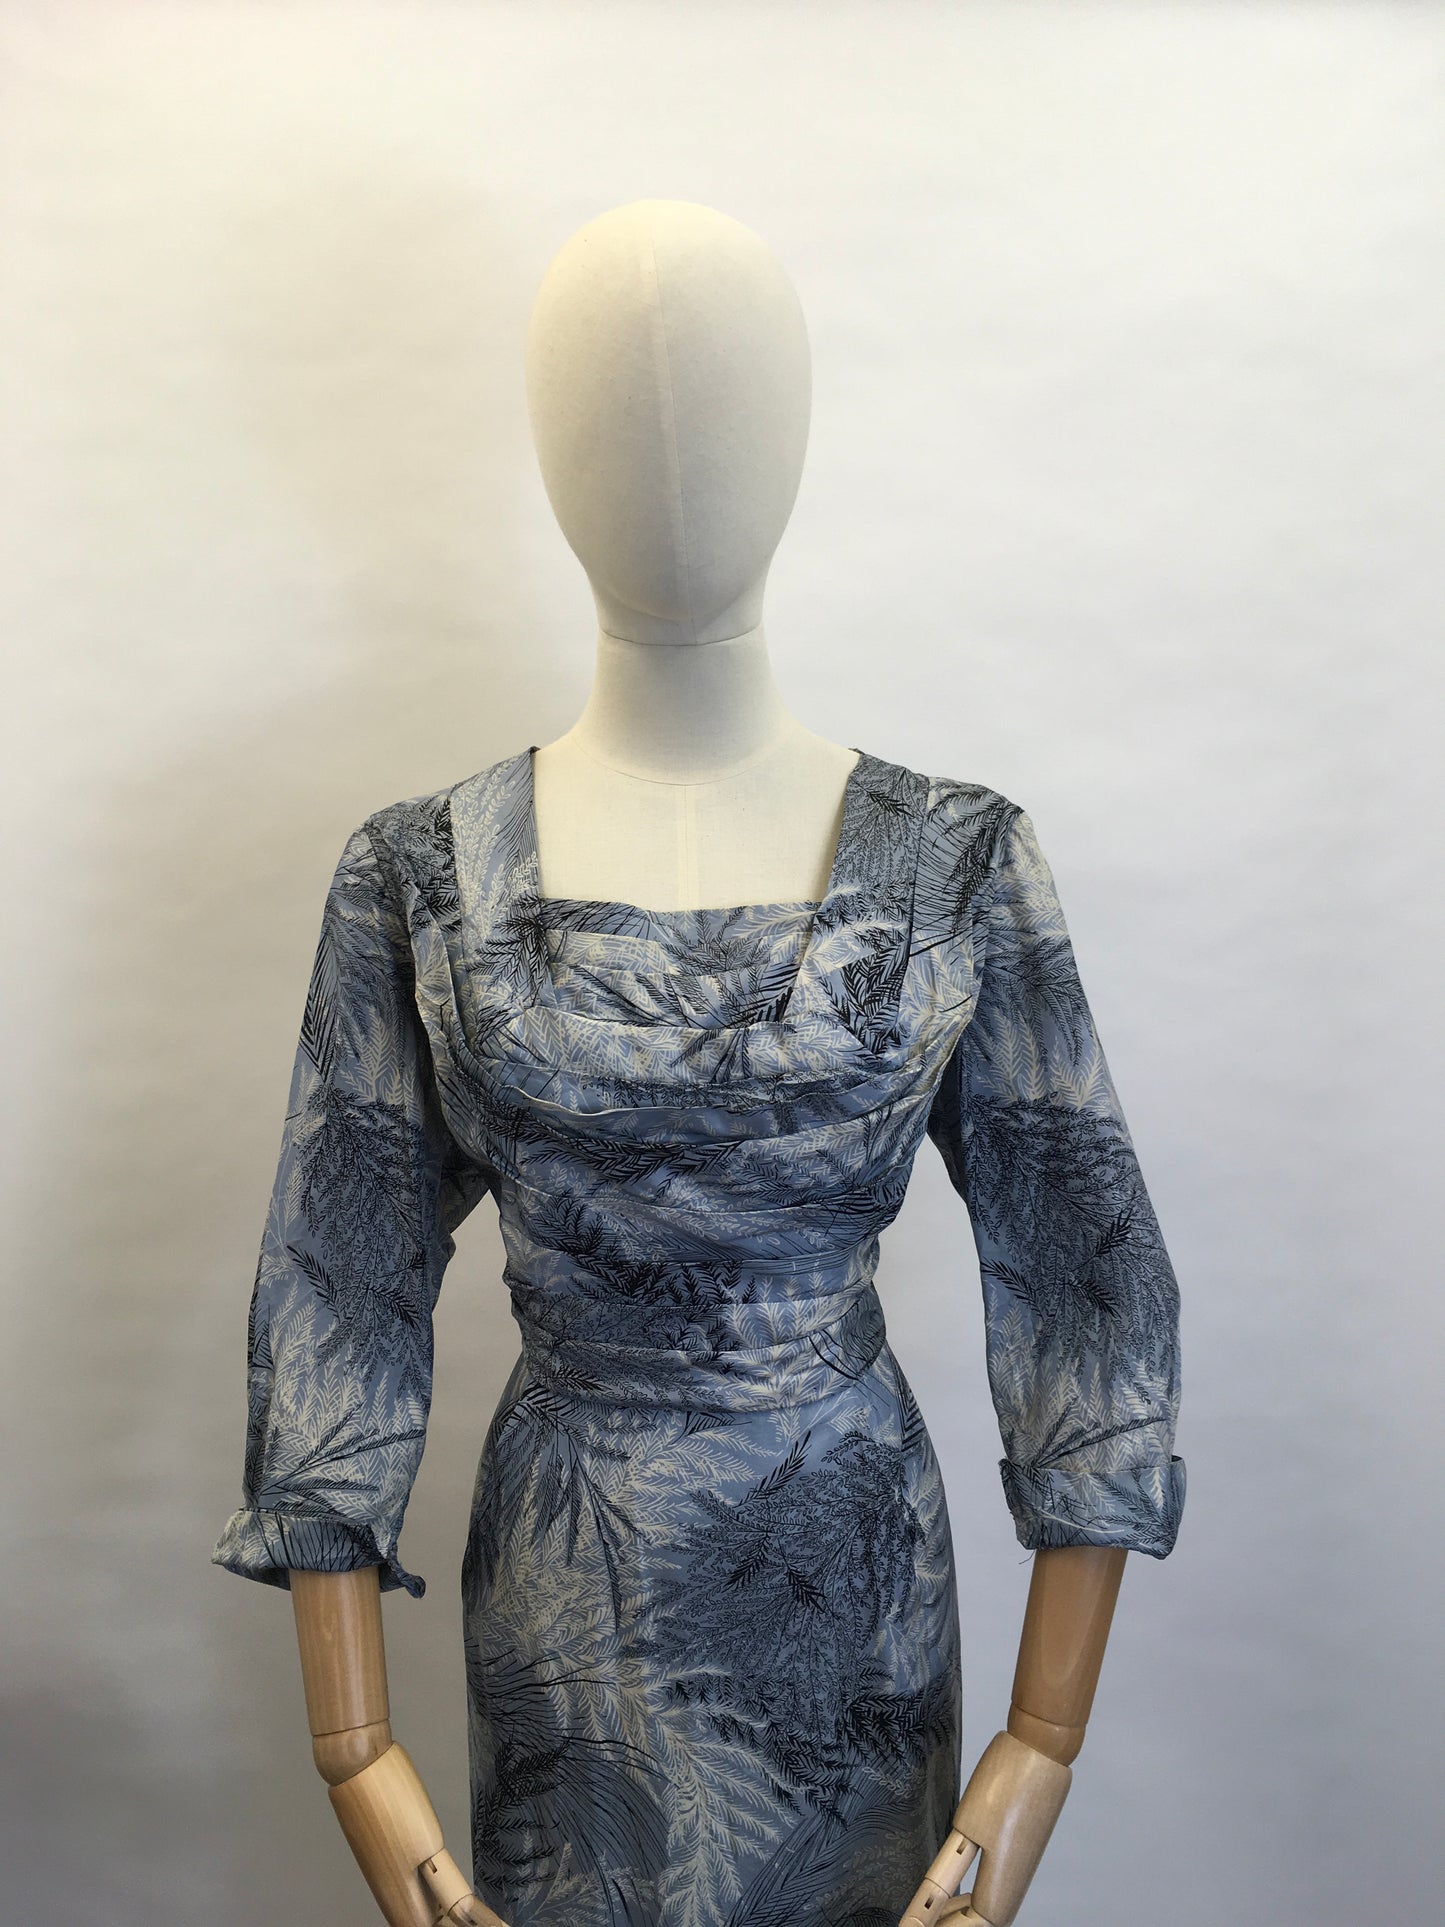 Original 1940’s Cocktail Dress - In a lovely Fern Print Silk in Power Blues and Shades of Grey